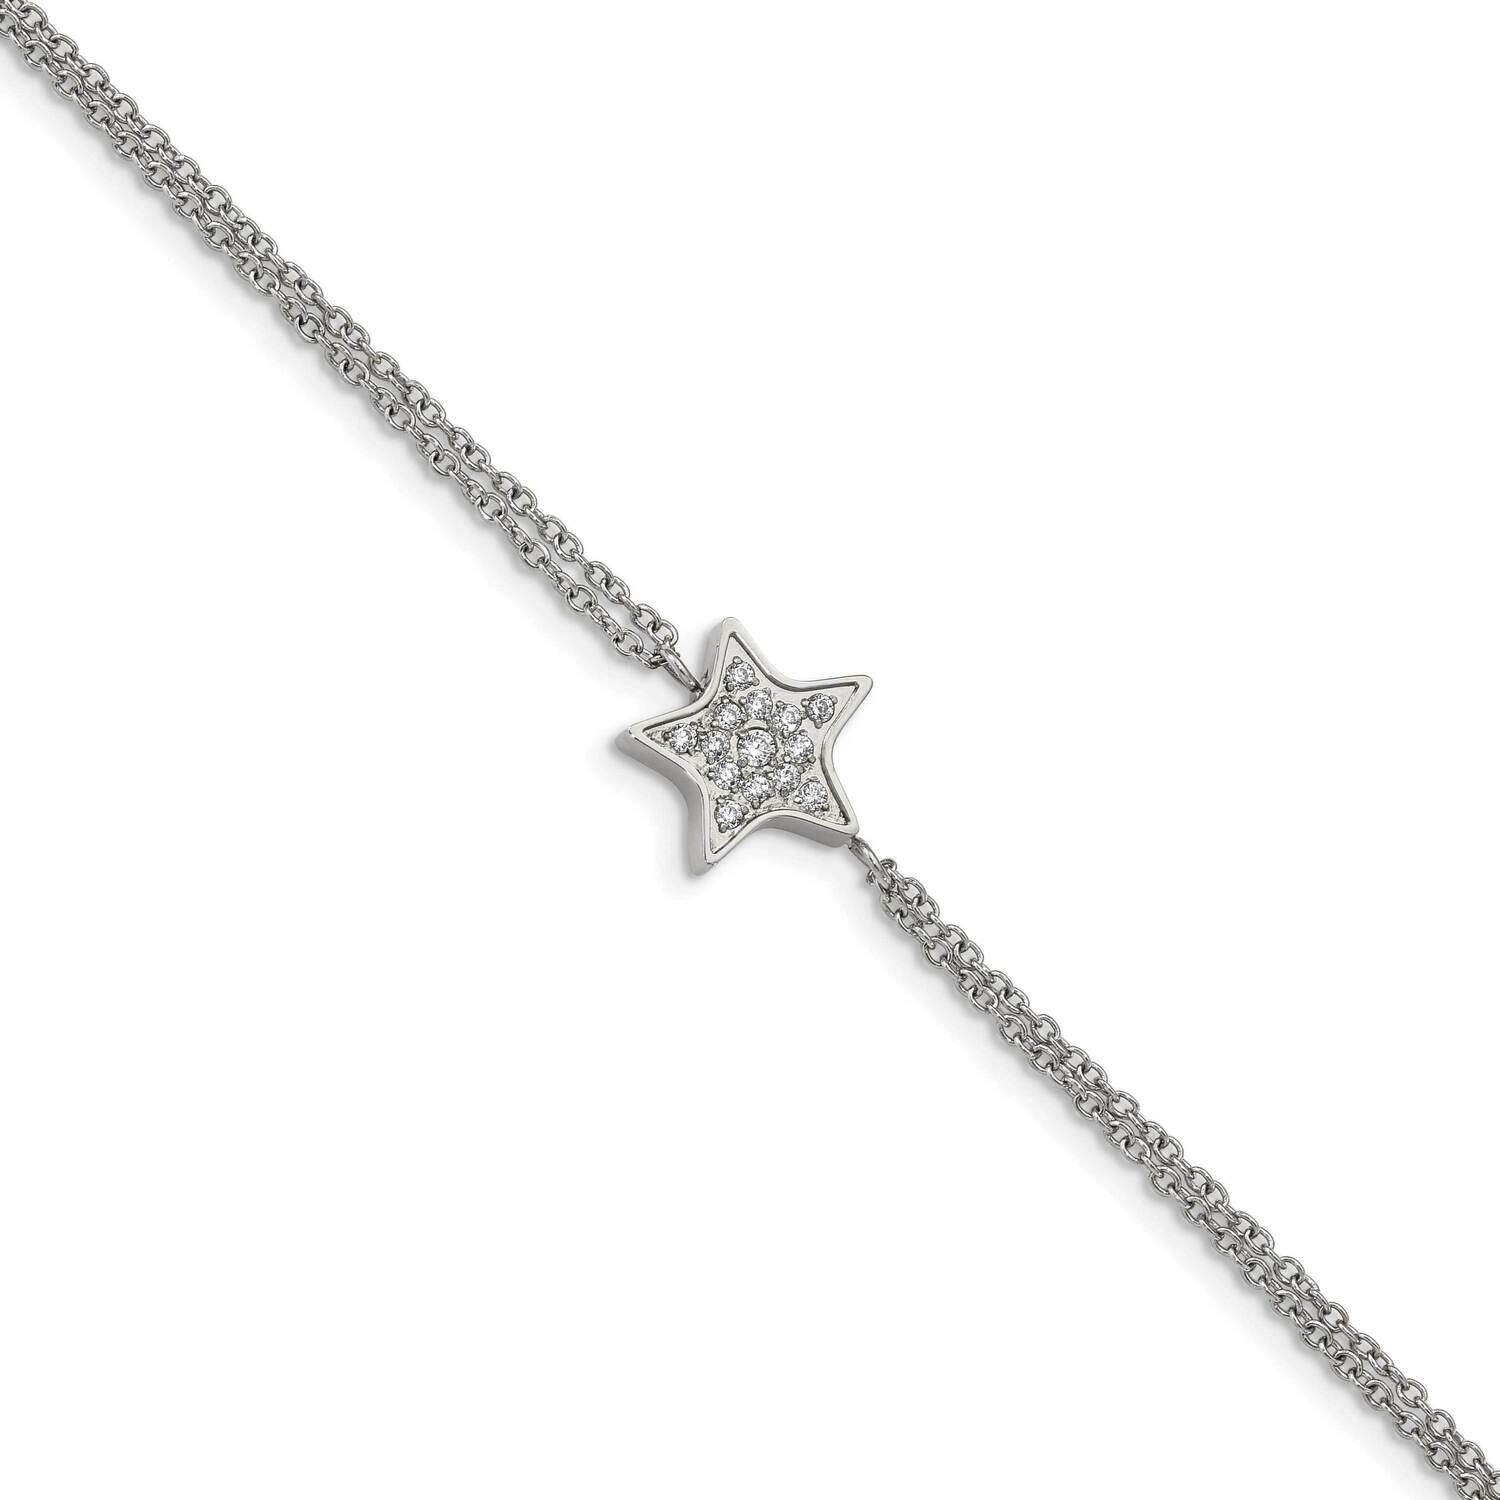 Cz Star 6.25 Inch 2 Inch Extension Bracelet Stainless Steel Polished SRB2608-6.25